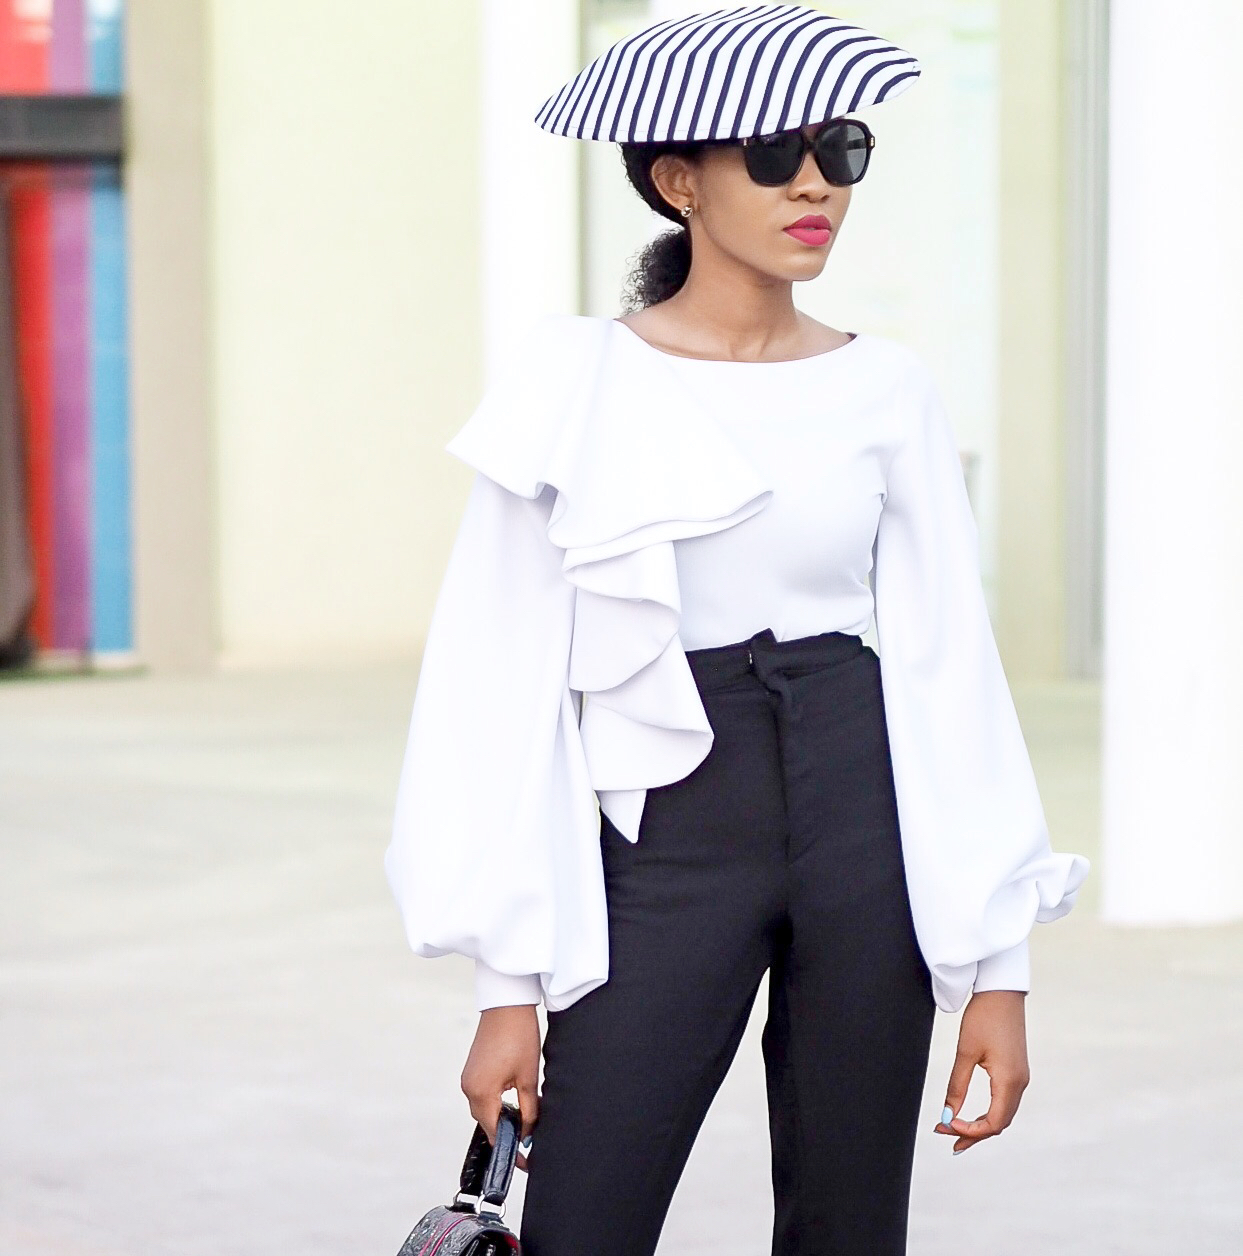 black and white monochrome outfit with saucer hat